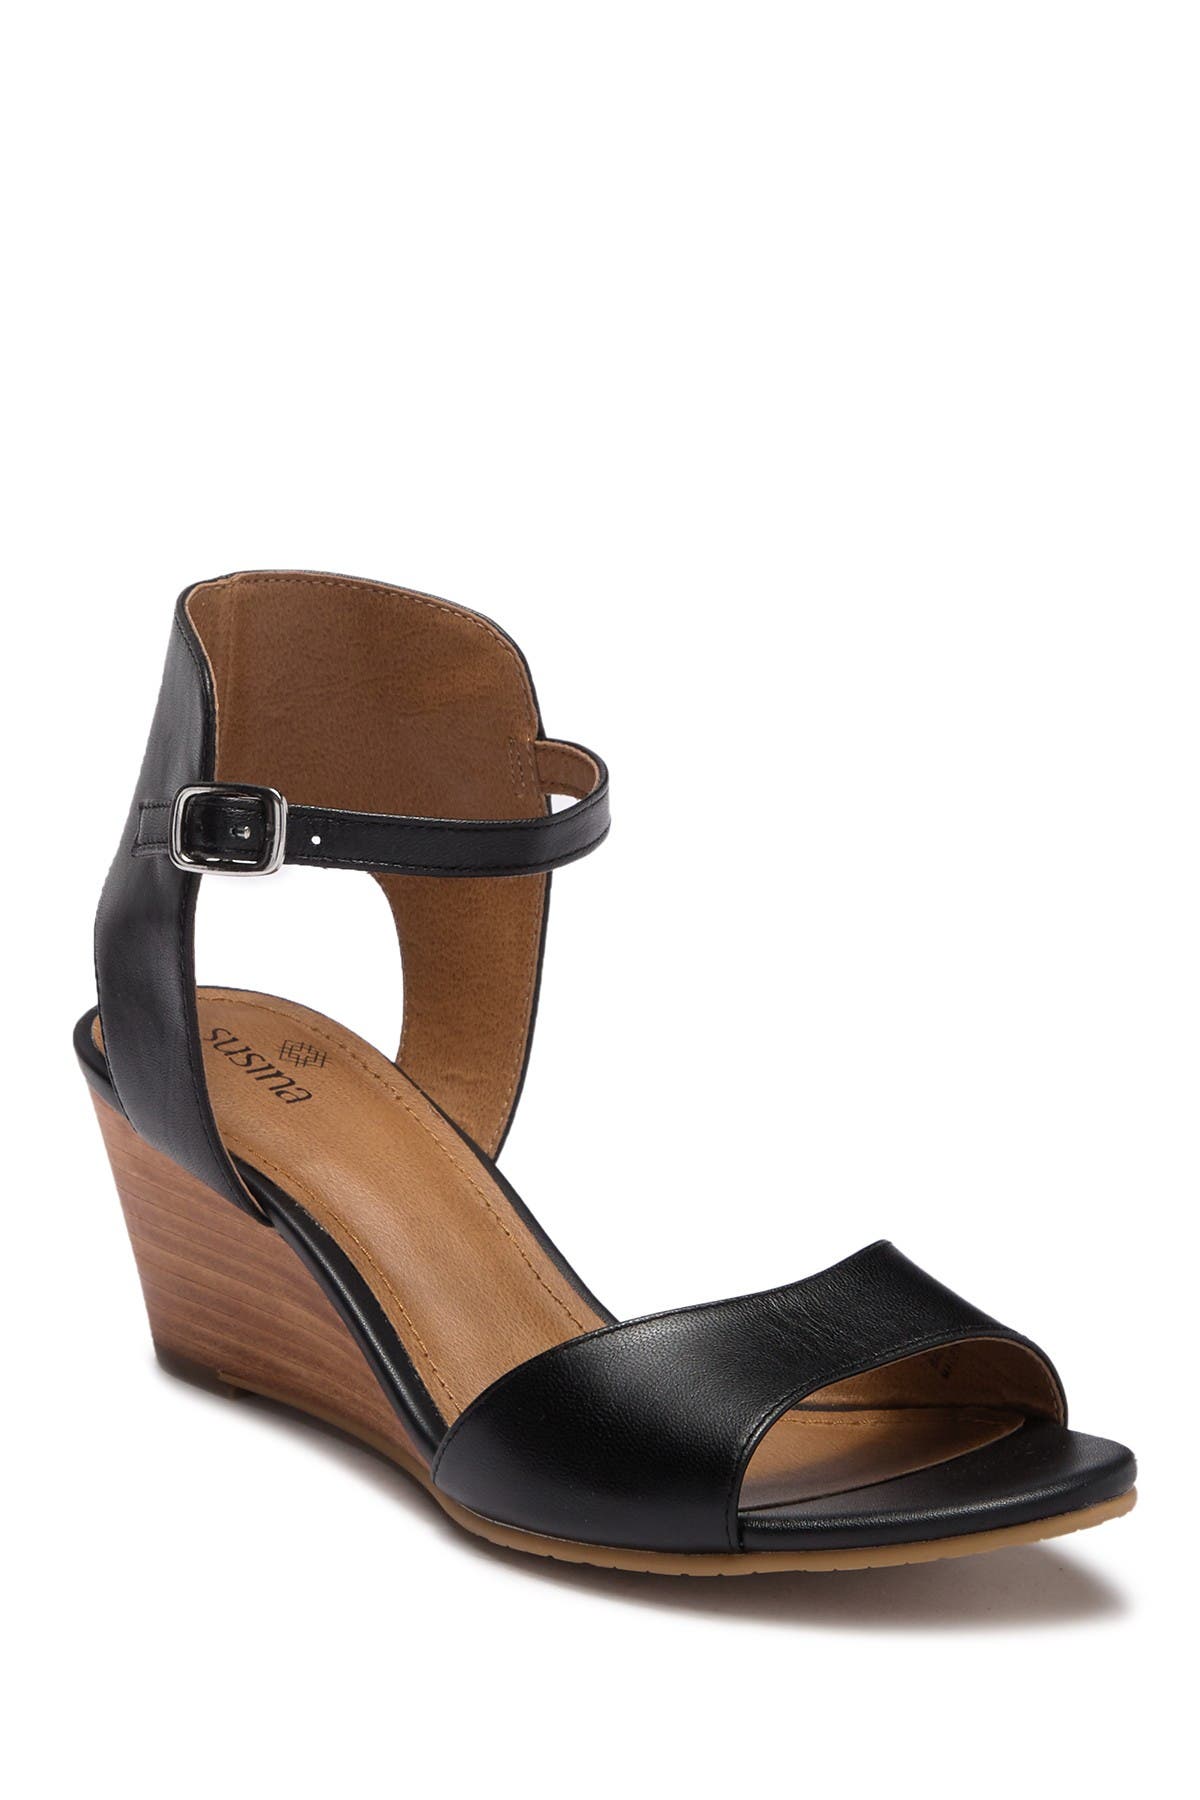 nordstrom susina shoes